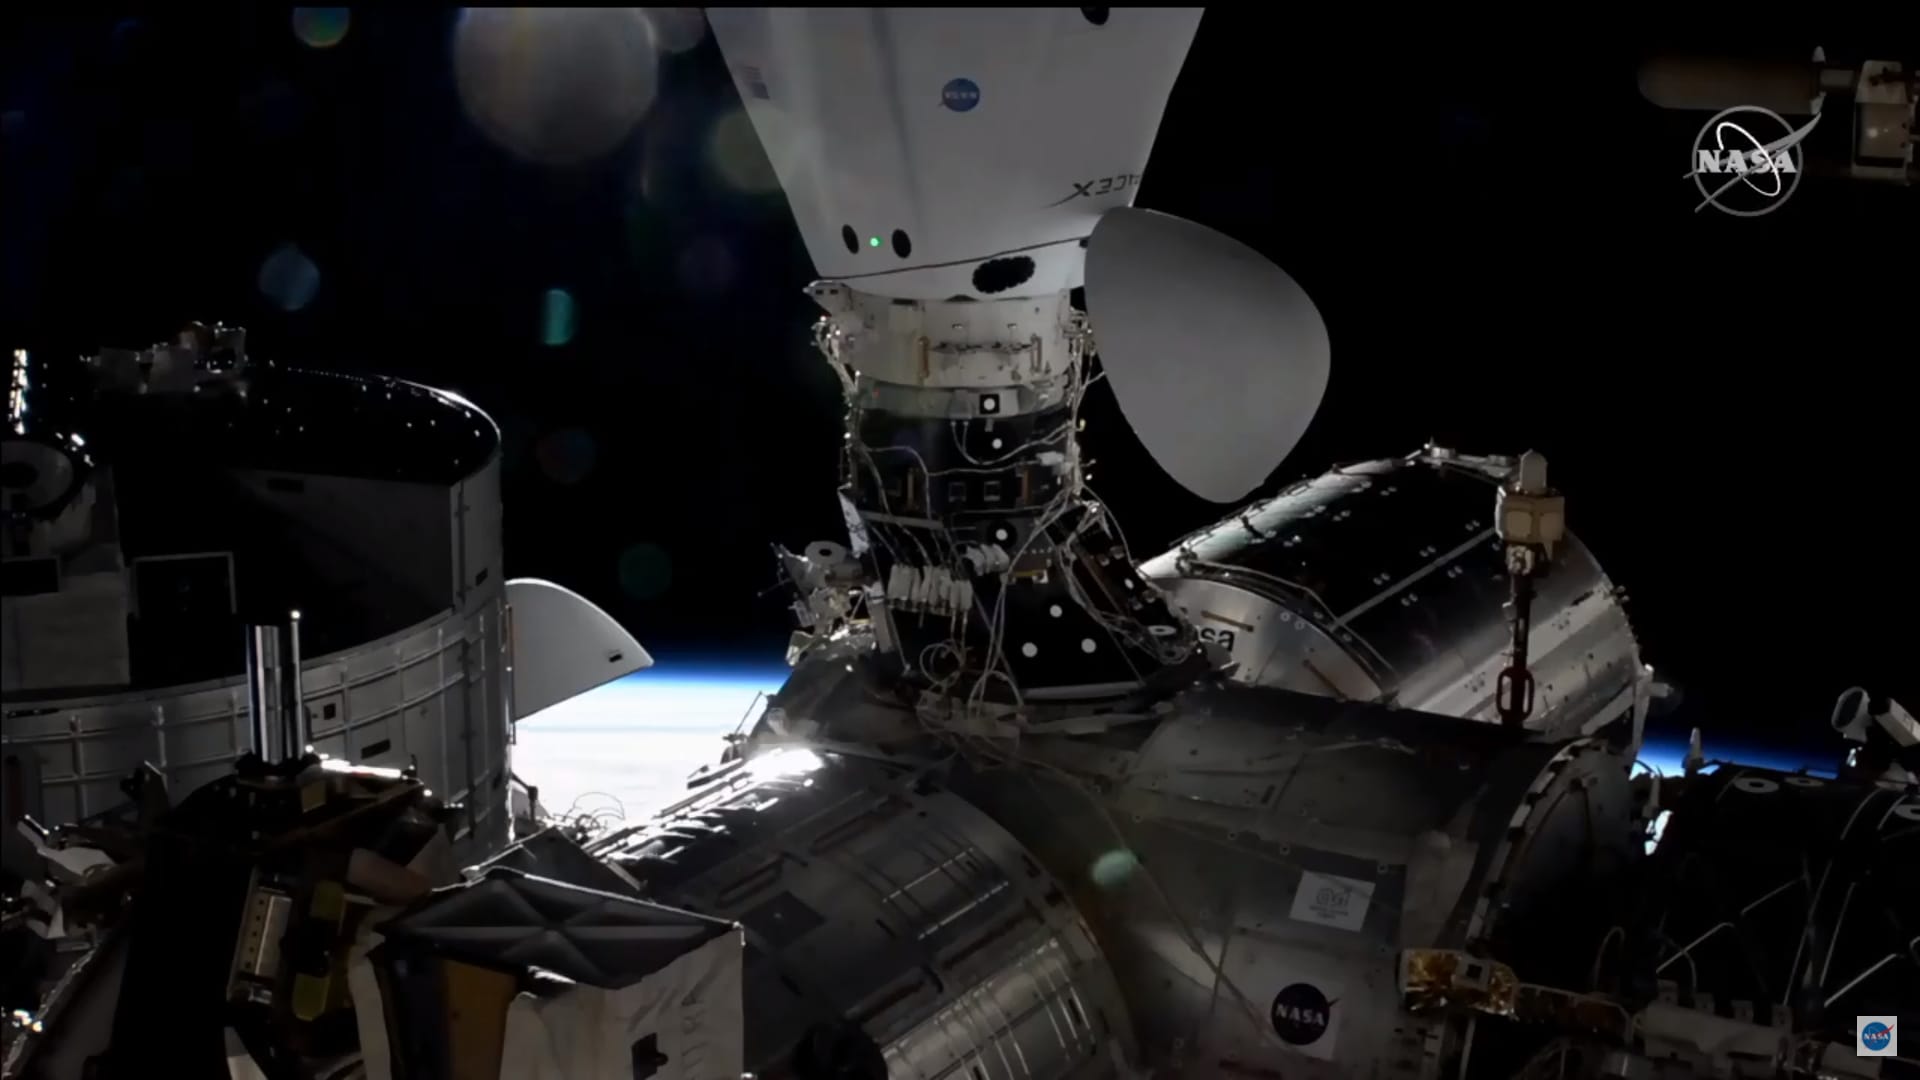 SpaceX now has two spacecraft docked to the space station for the first time